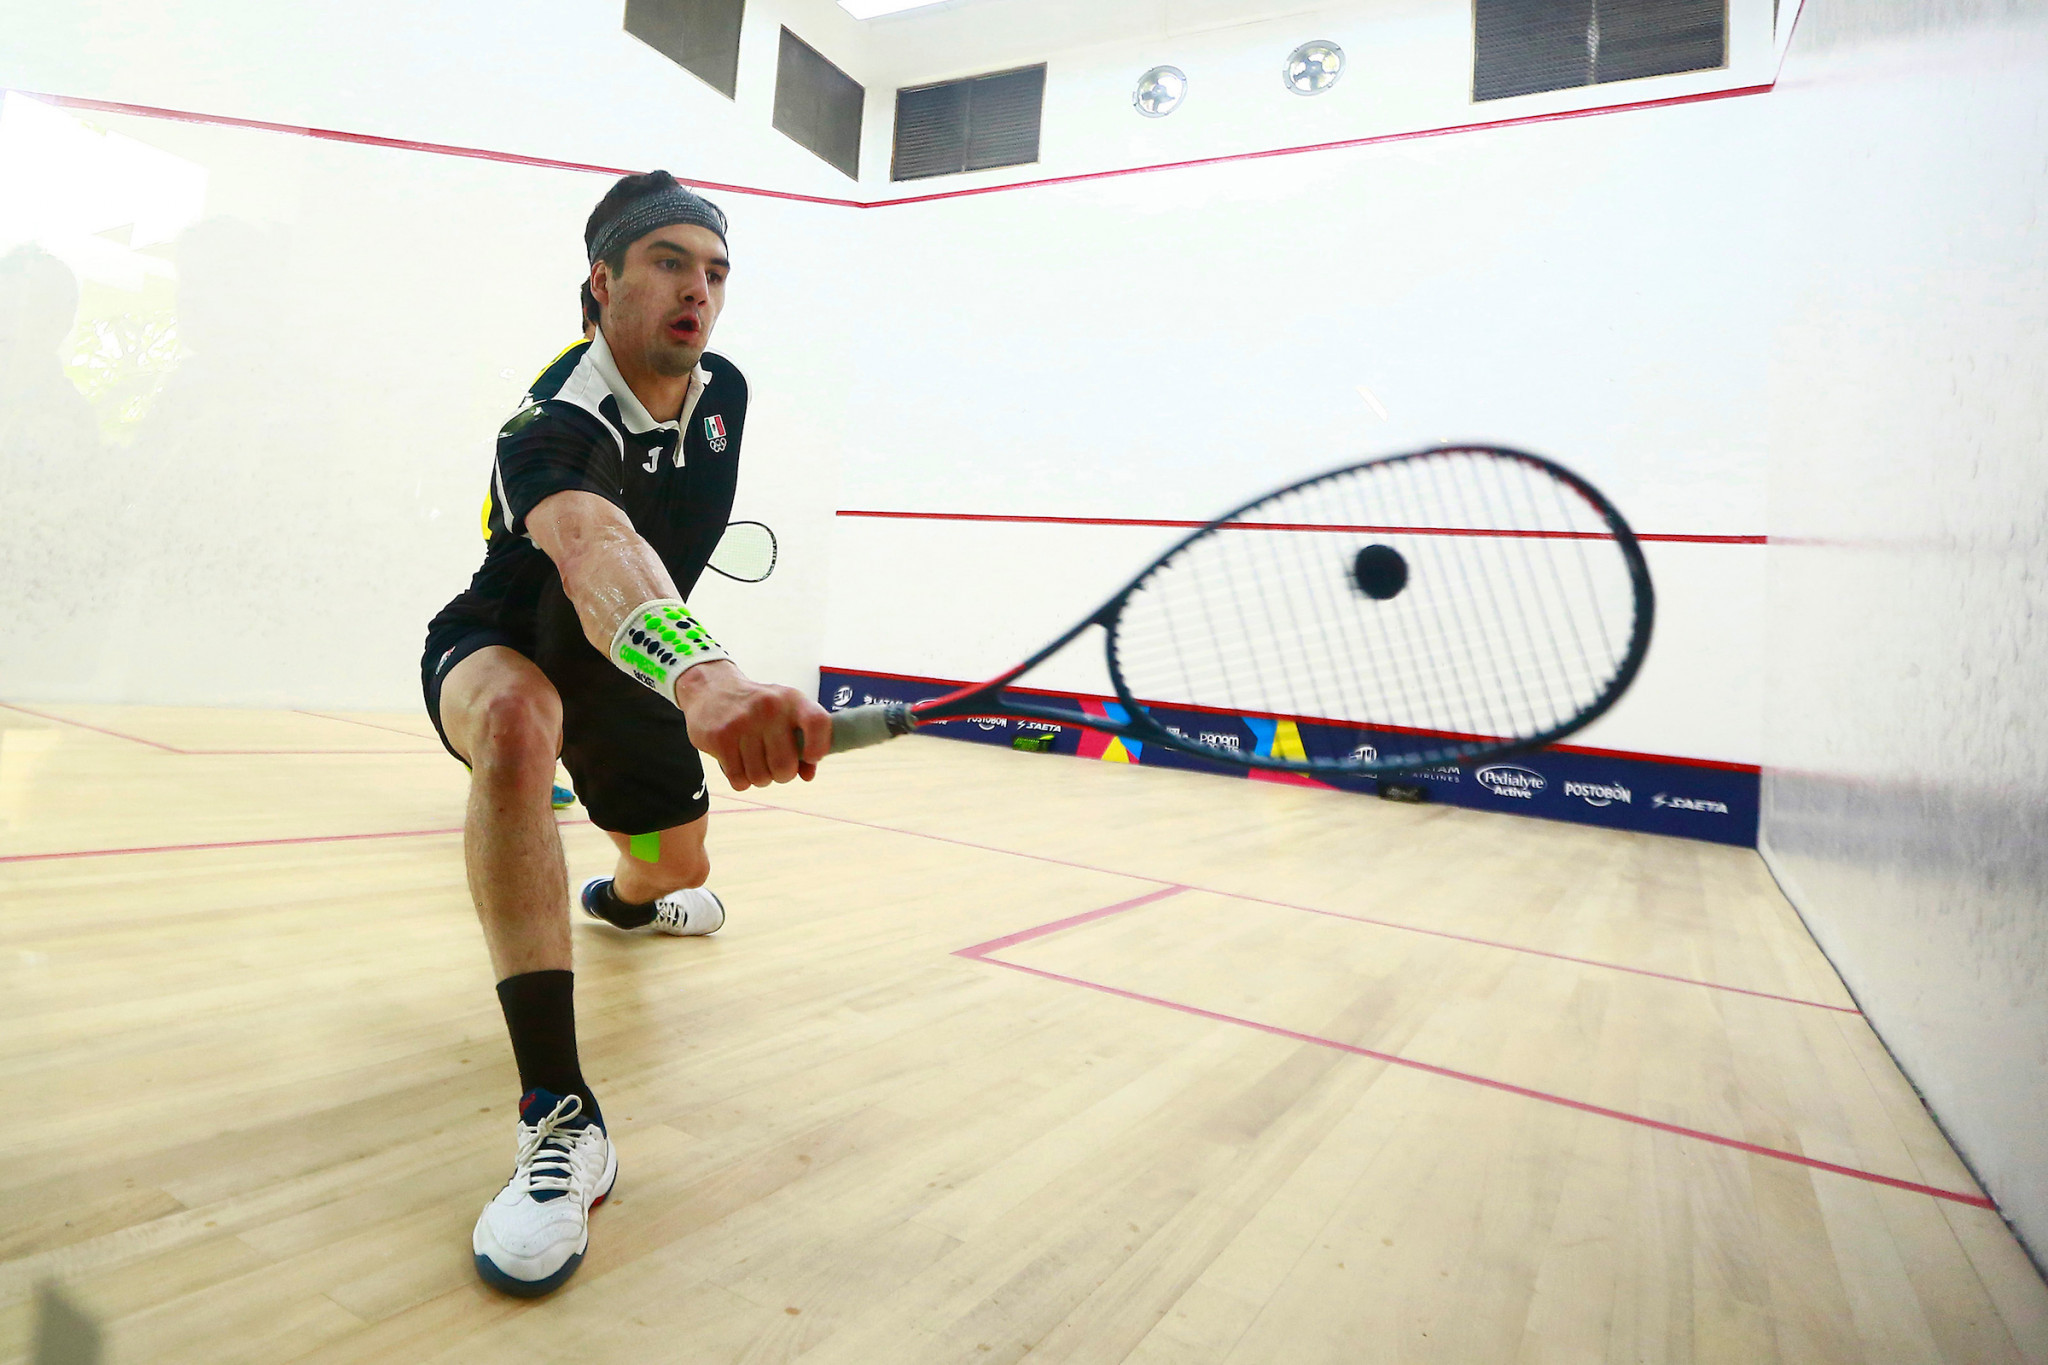 Mexico's men then followed suit with victory over Brazil in the Club Campestre de Cali Canchas Squash ©Agencia.Xpress Media